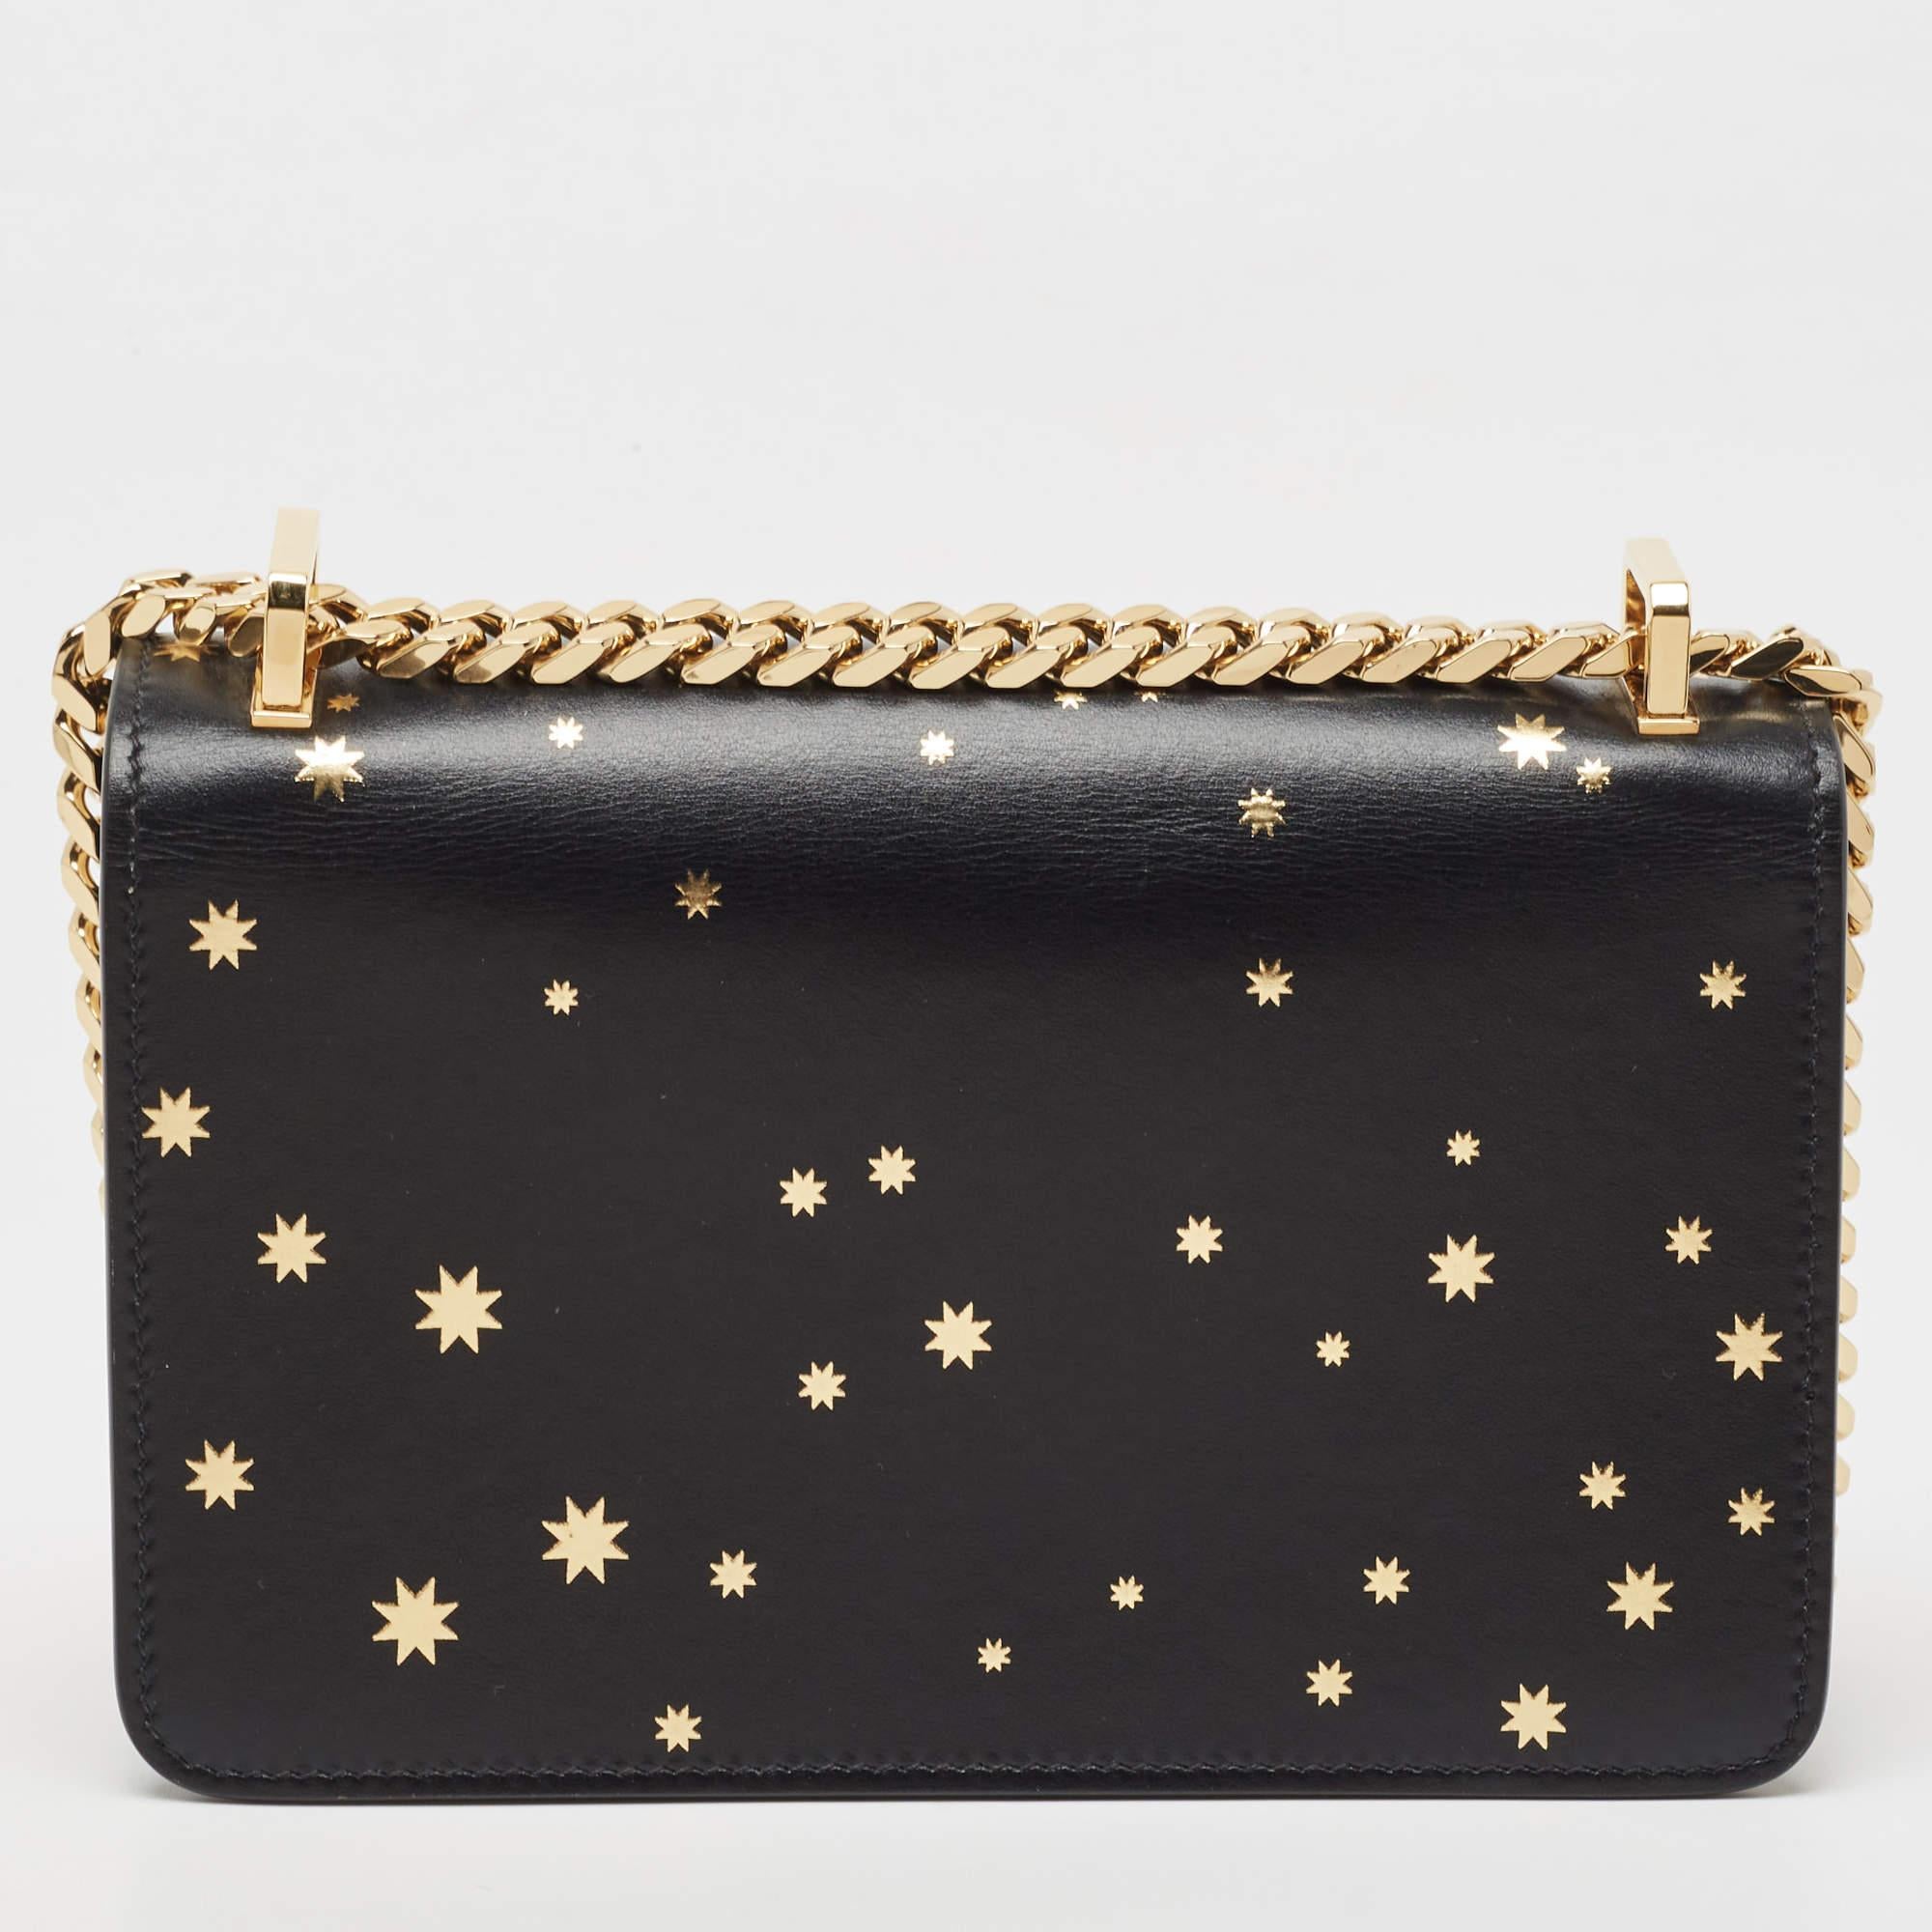 Burberry's black leather shoulder bag is a knowing investment piece that's on-trend now, too. It's finished with an elegant gold-tone metal TB clasp as well as an adjustable shoulder strap so it can be worn in a number of different ways. With more